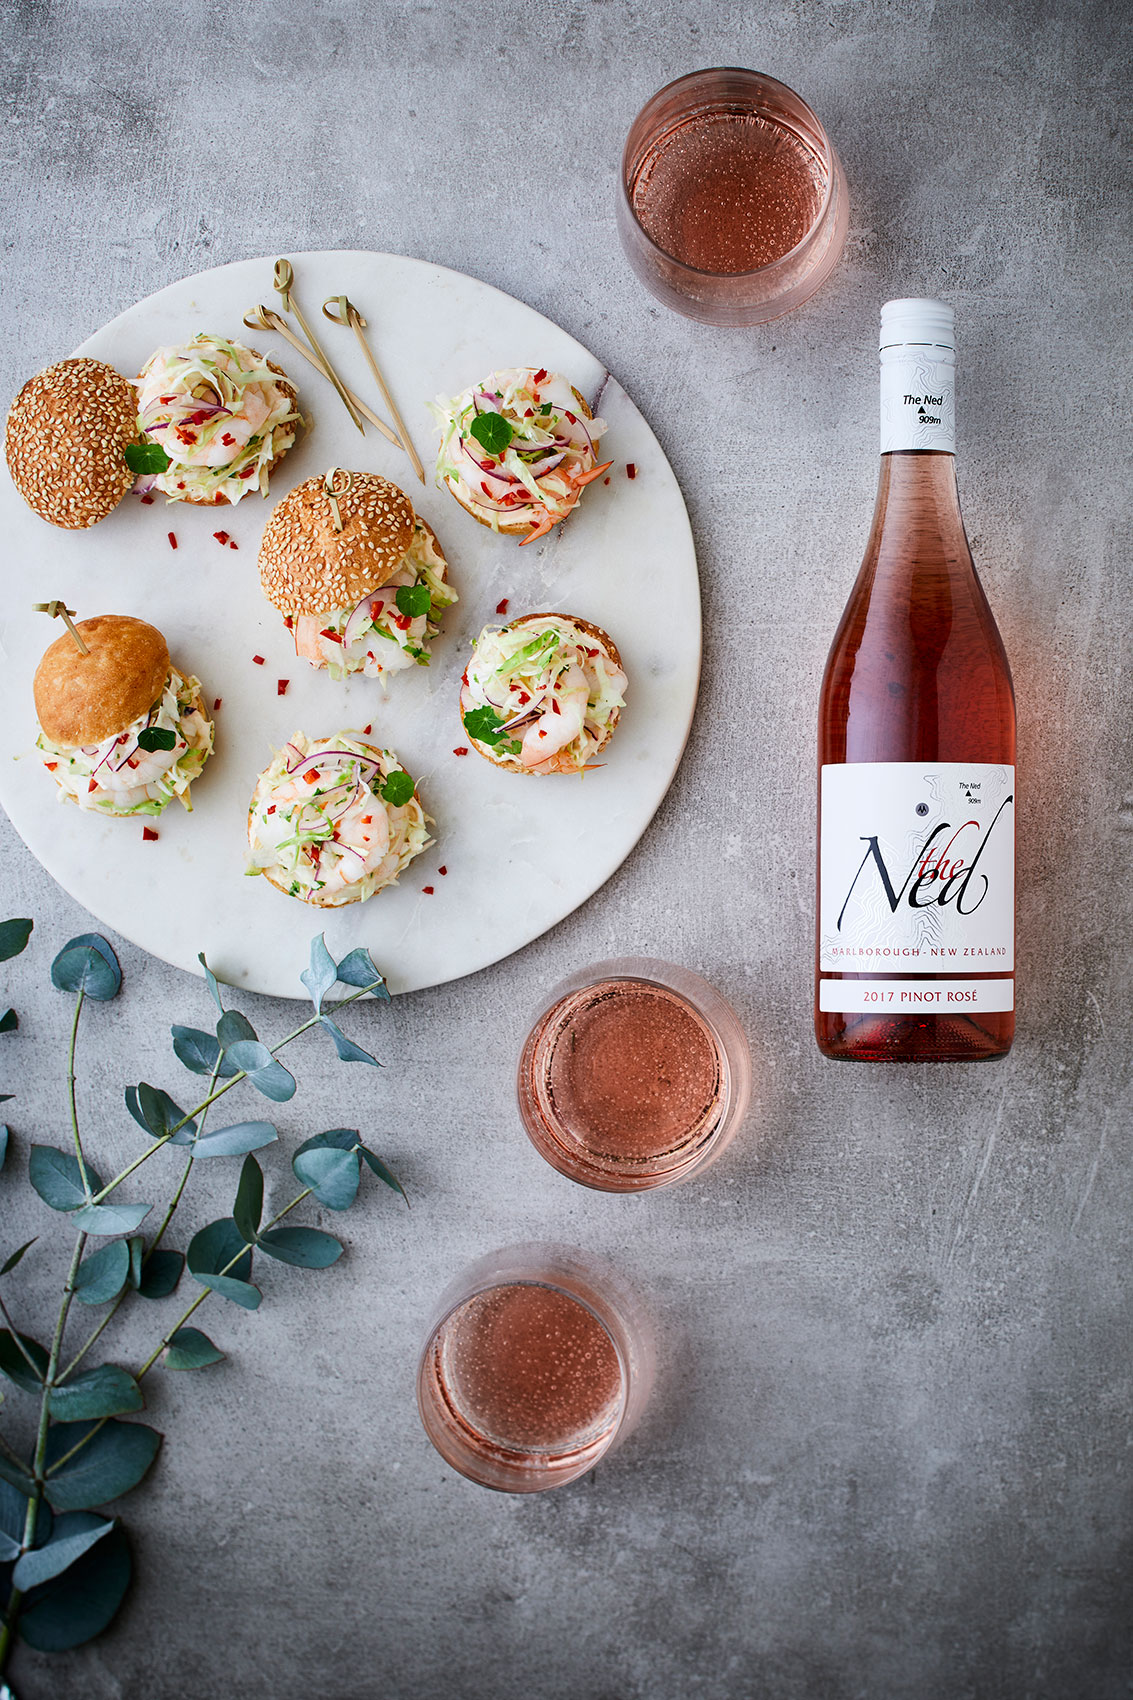 The Ned Marlbrough Pino Rose 2017 with Mini Burgers • Beverage & Liquid Photography